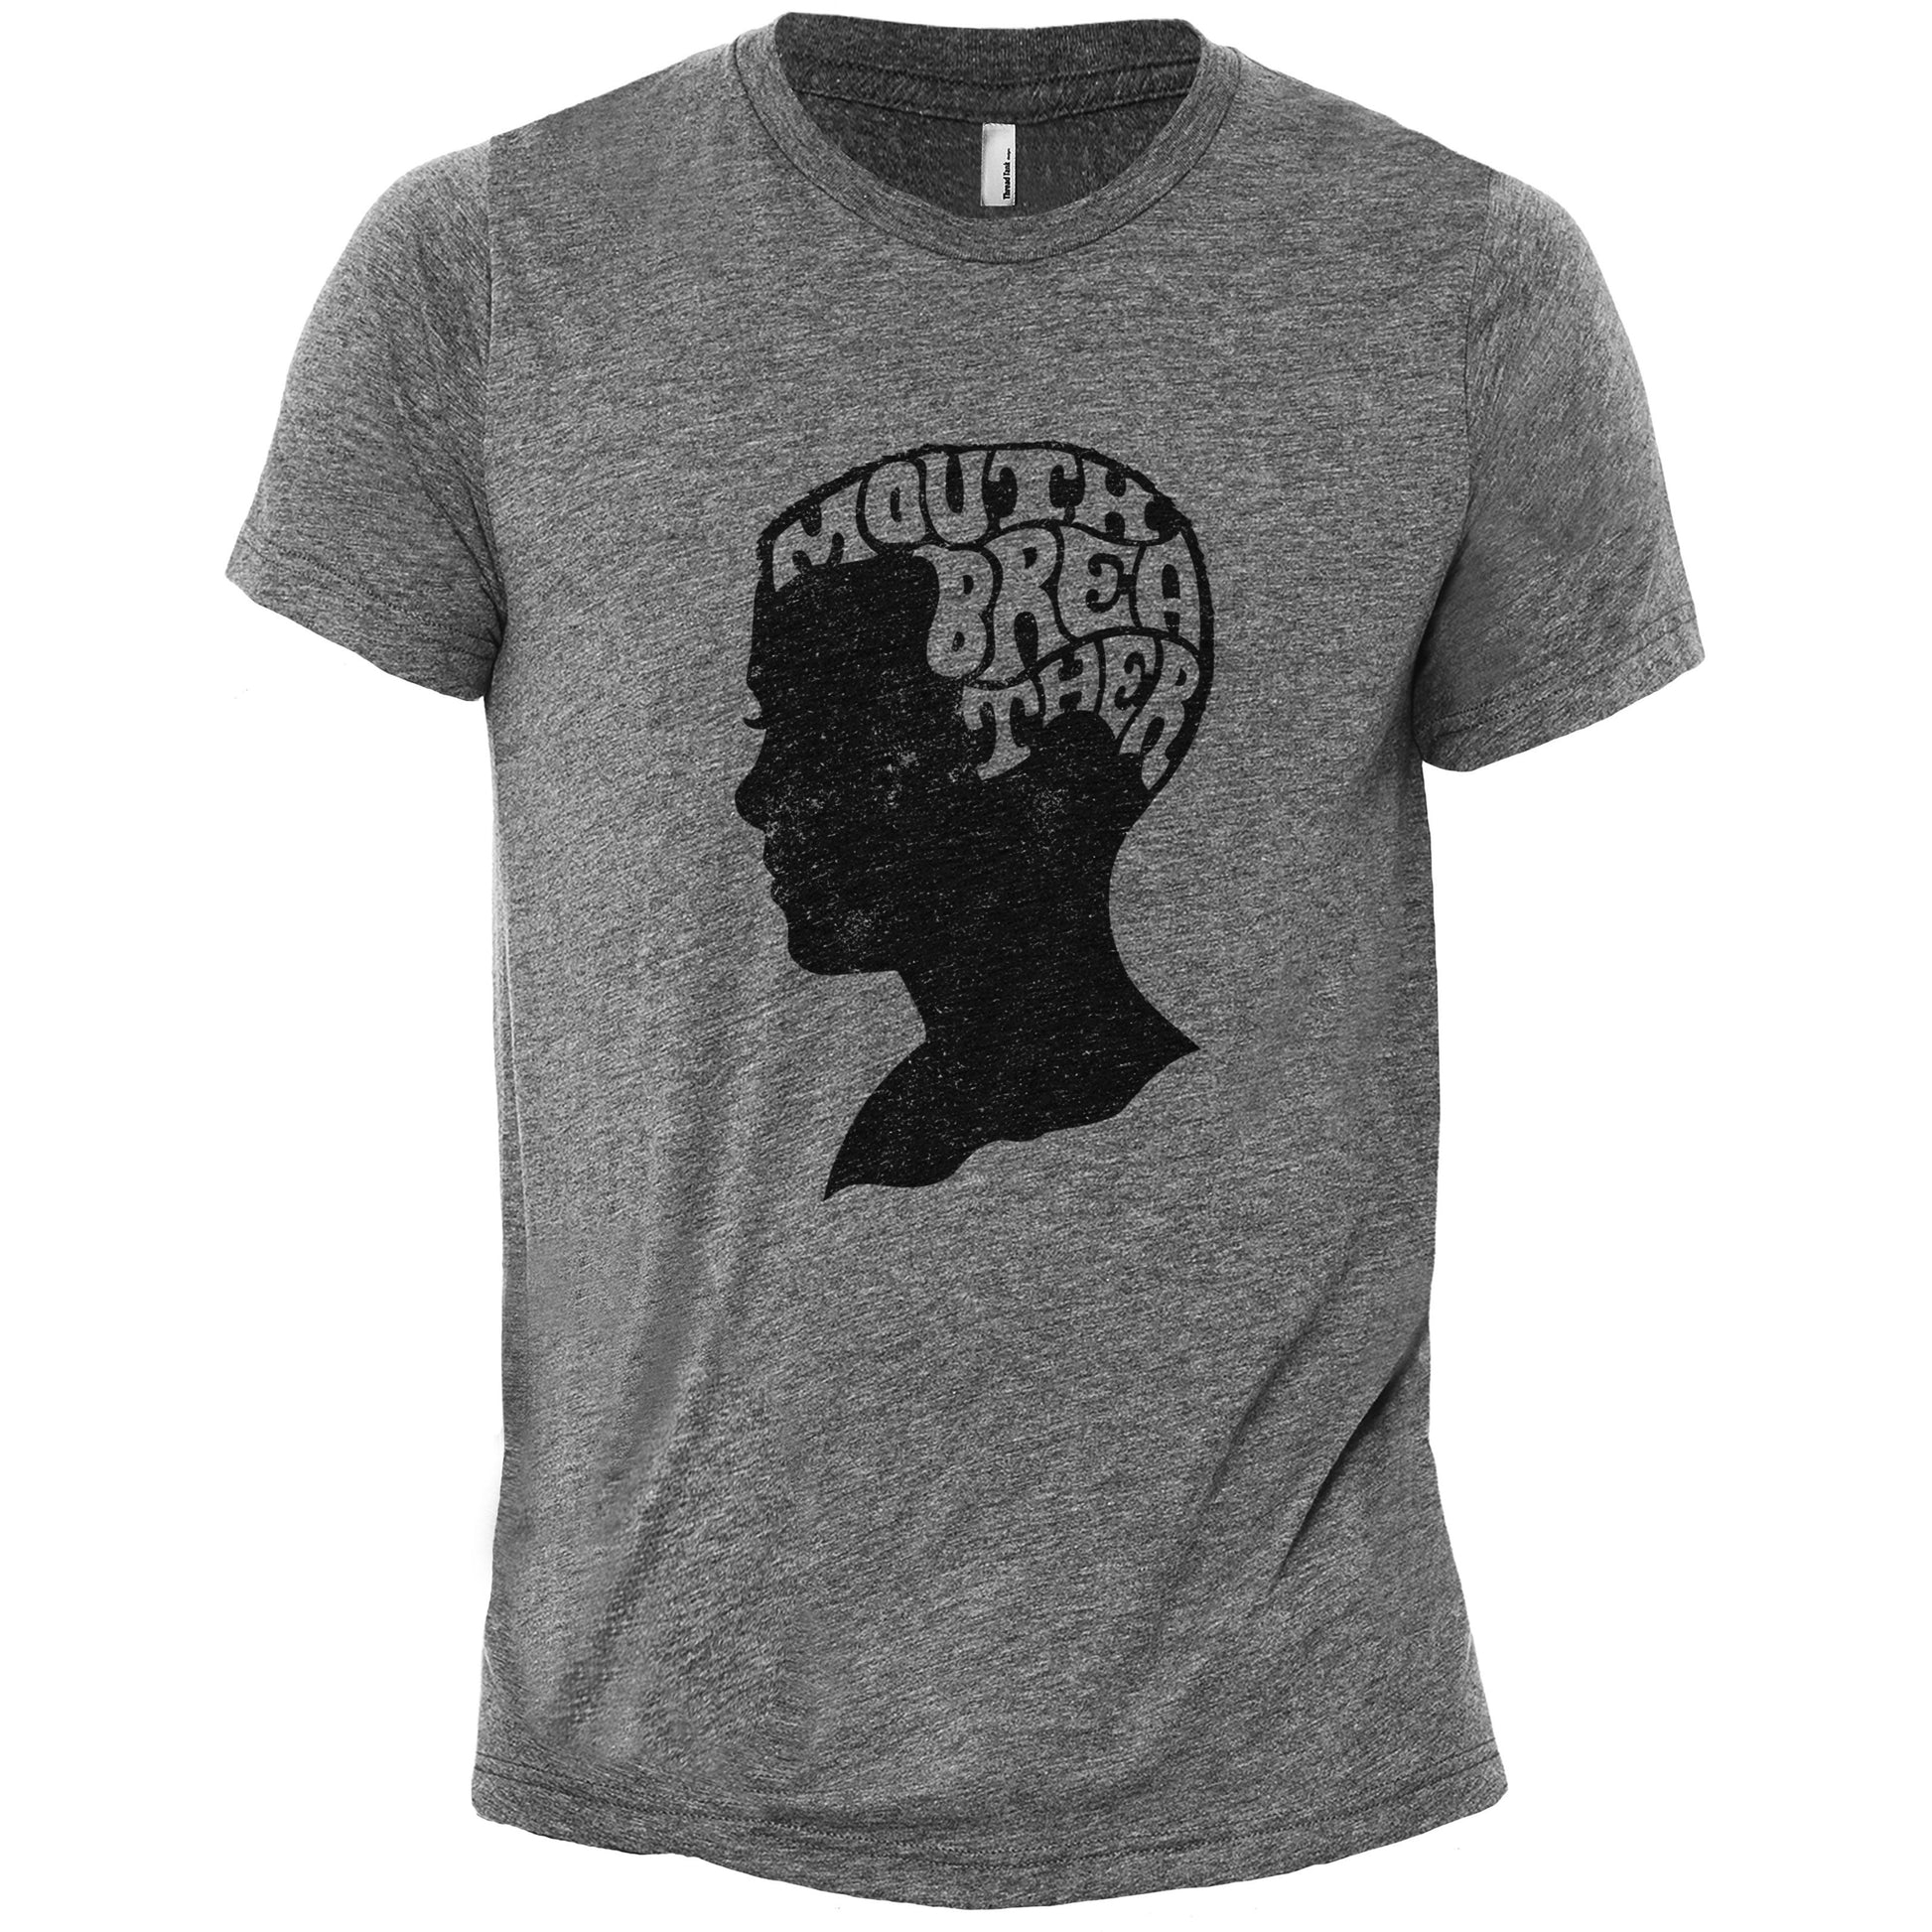 Mouthbreather Printed Graphic Men's Crew T-Shirt Grey Main Image